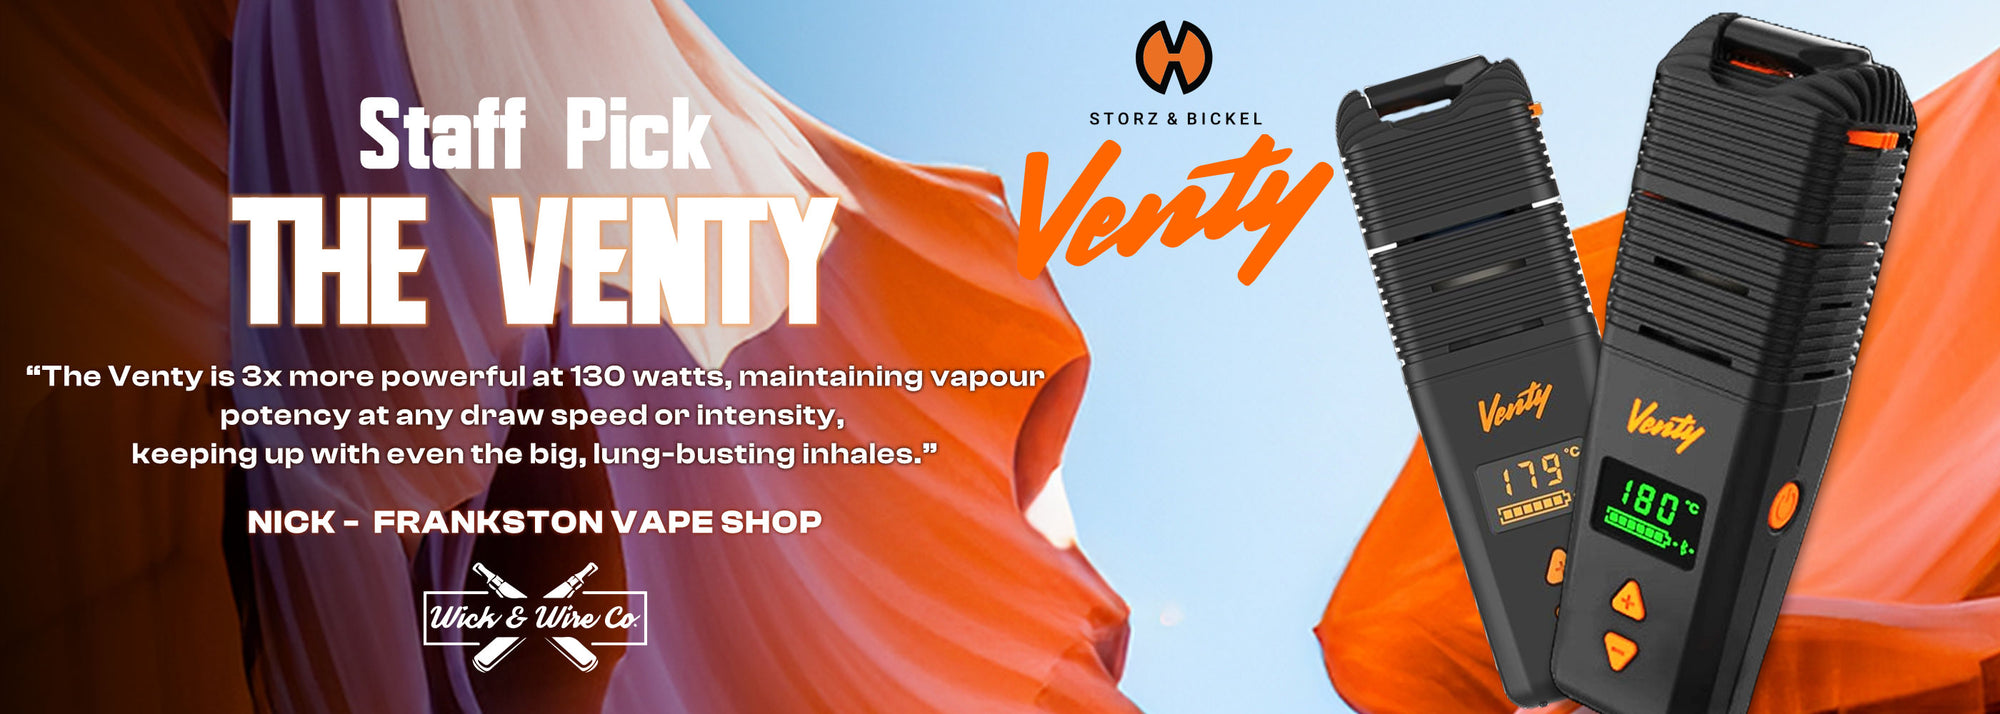 Storz and Bickel Venty Review - Wick and Wire Co Melbourne Vape Shop, Victoria Australia